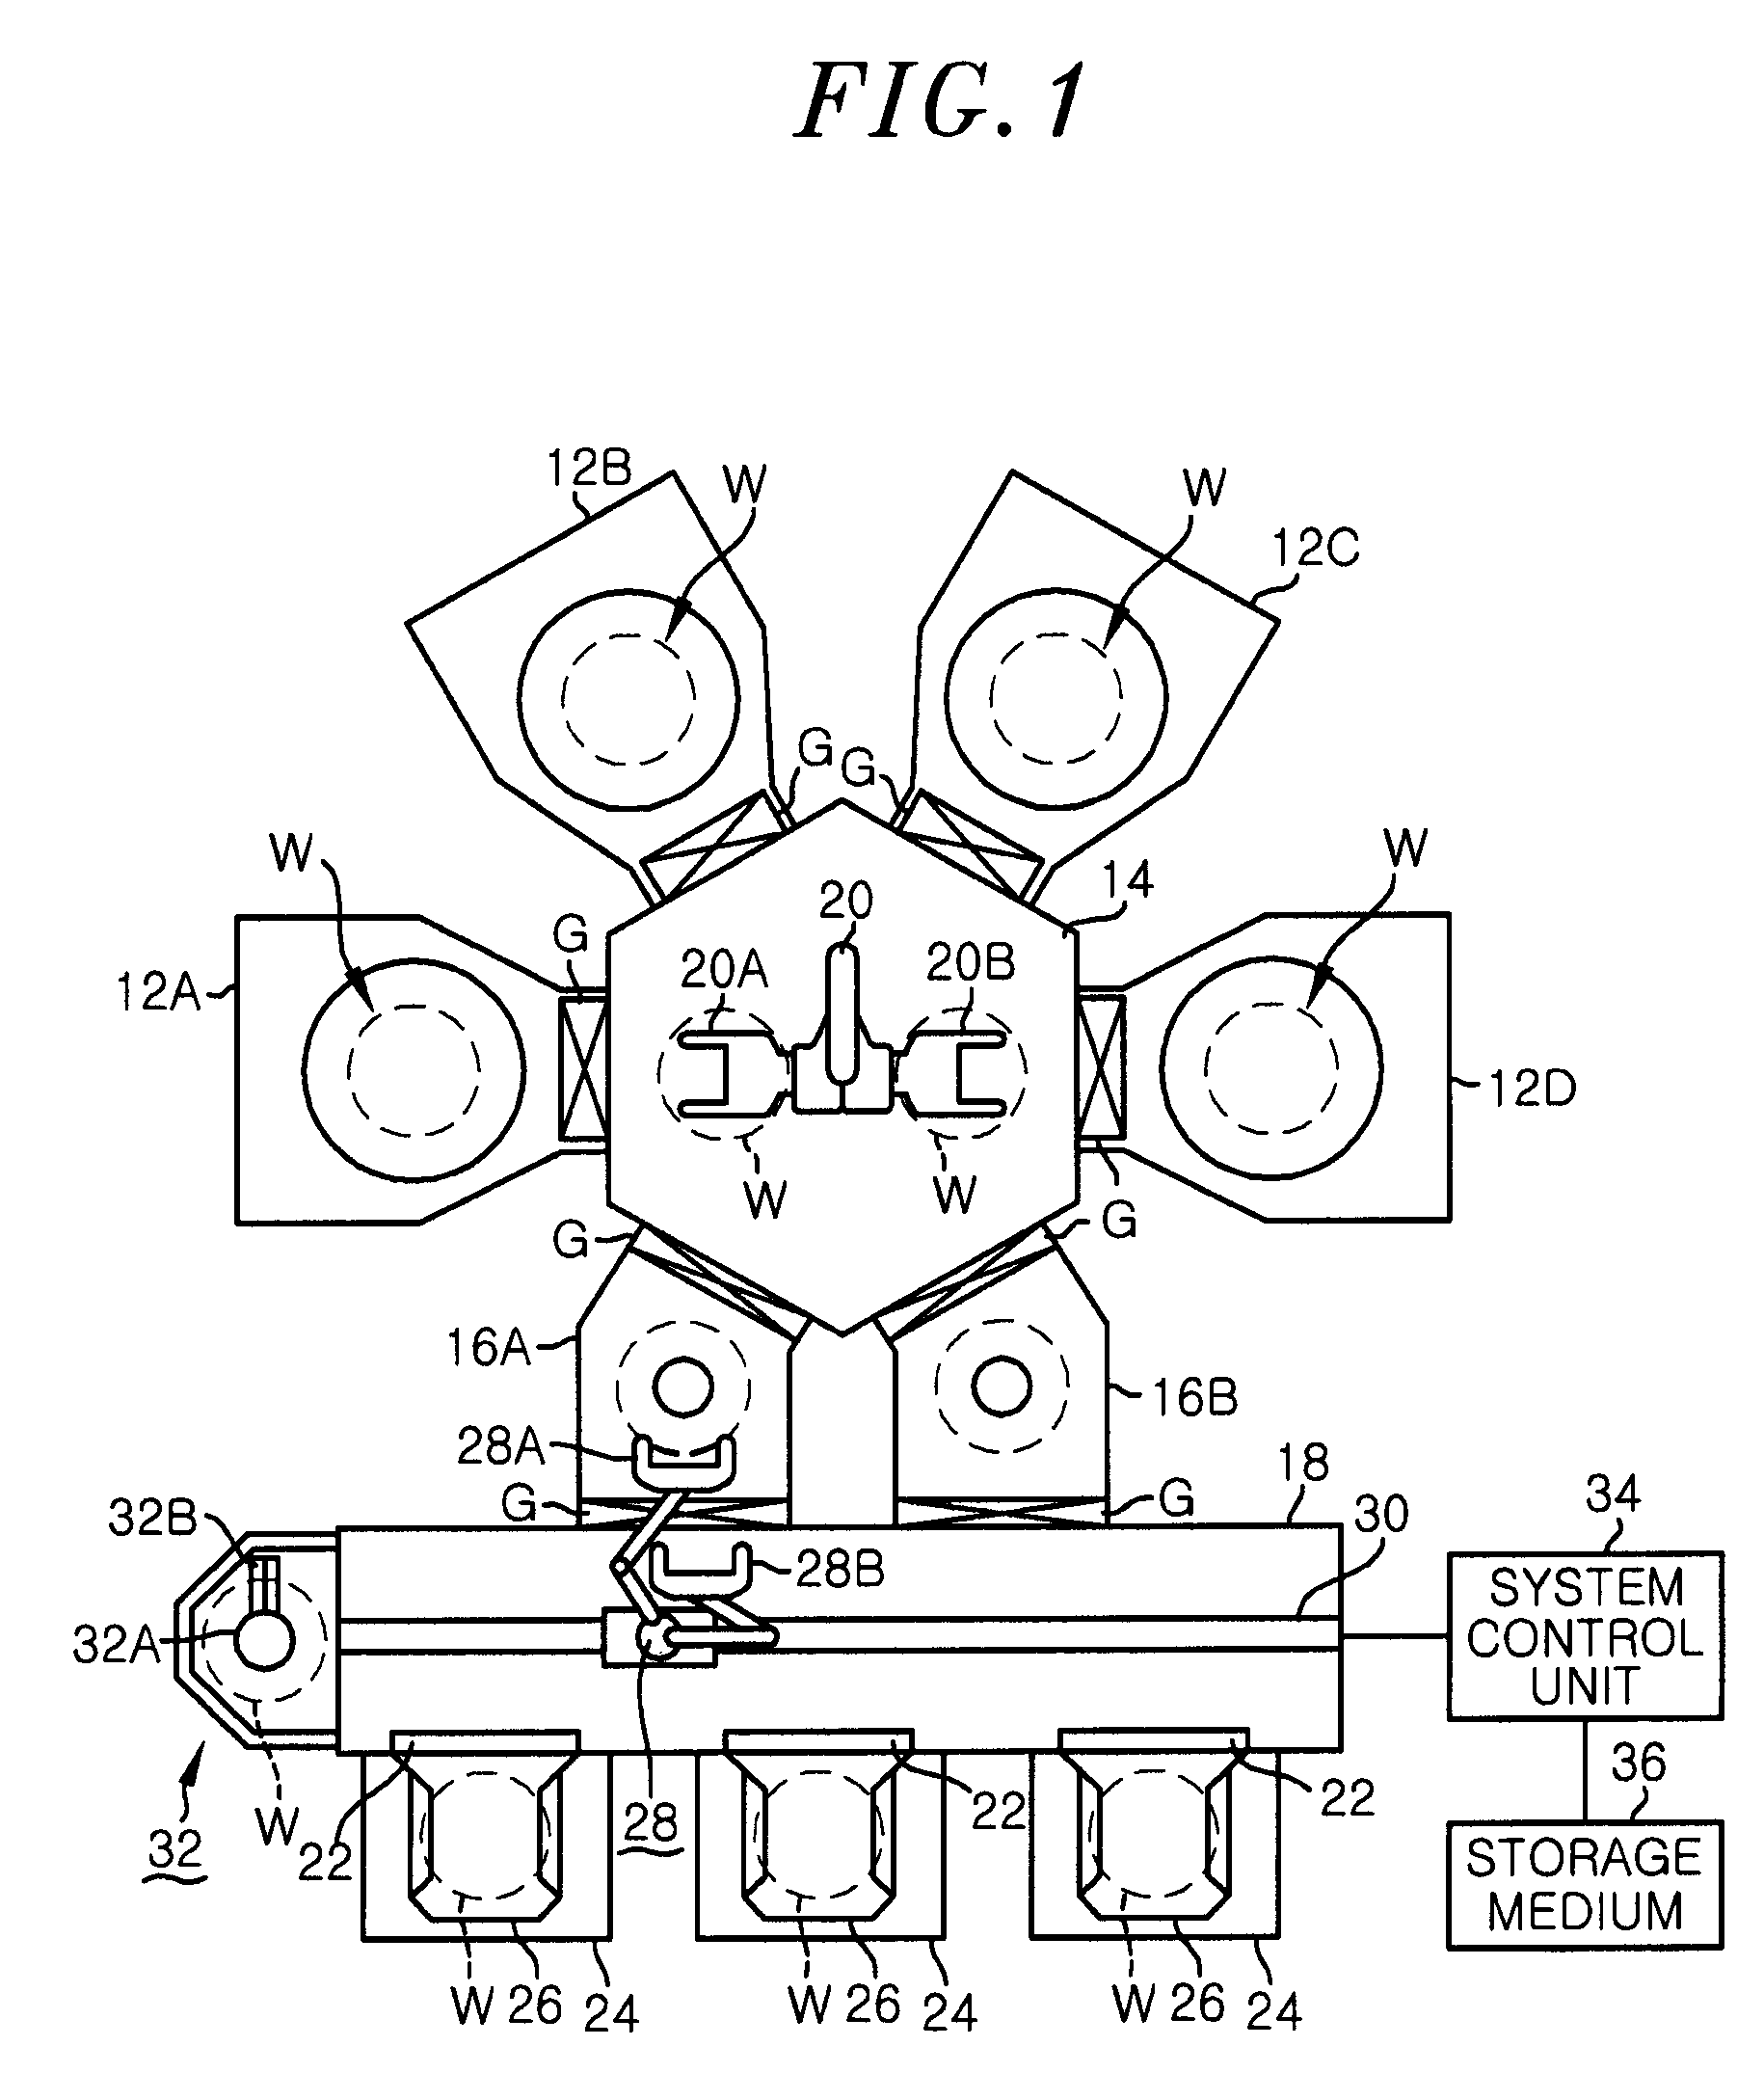 Film forming method and processing system